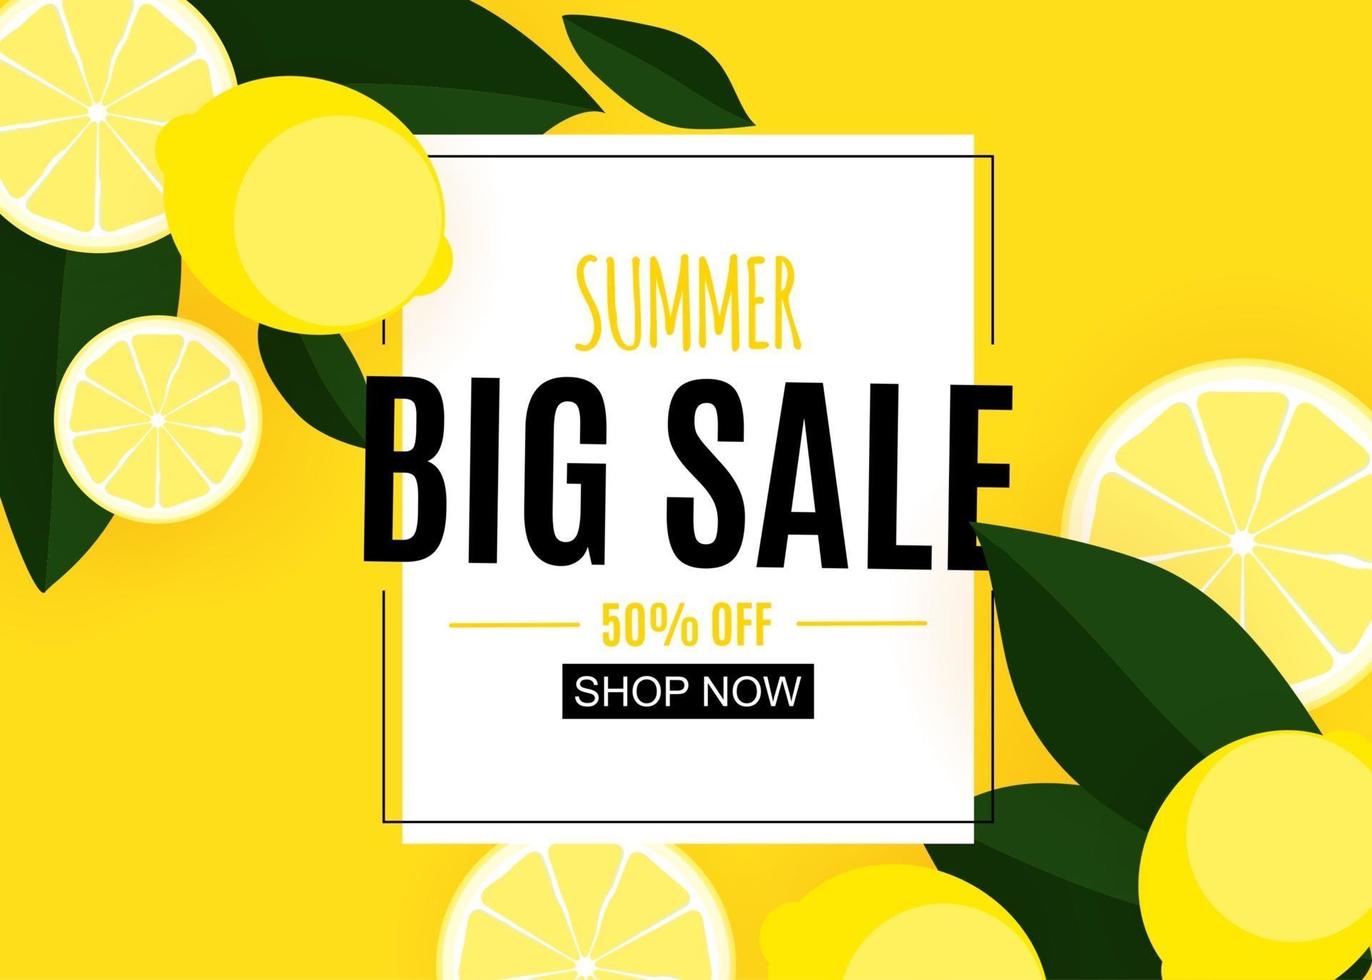 Abstract Summer Sale Background with Lemon. Vector Illustration